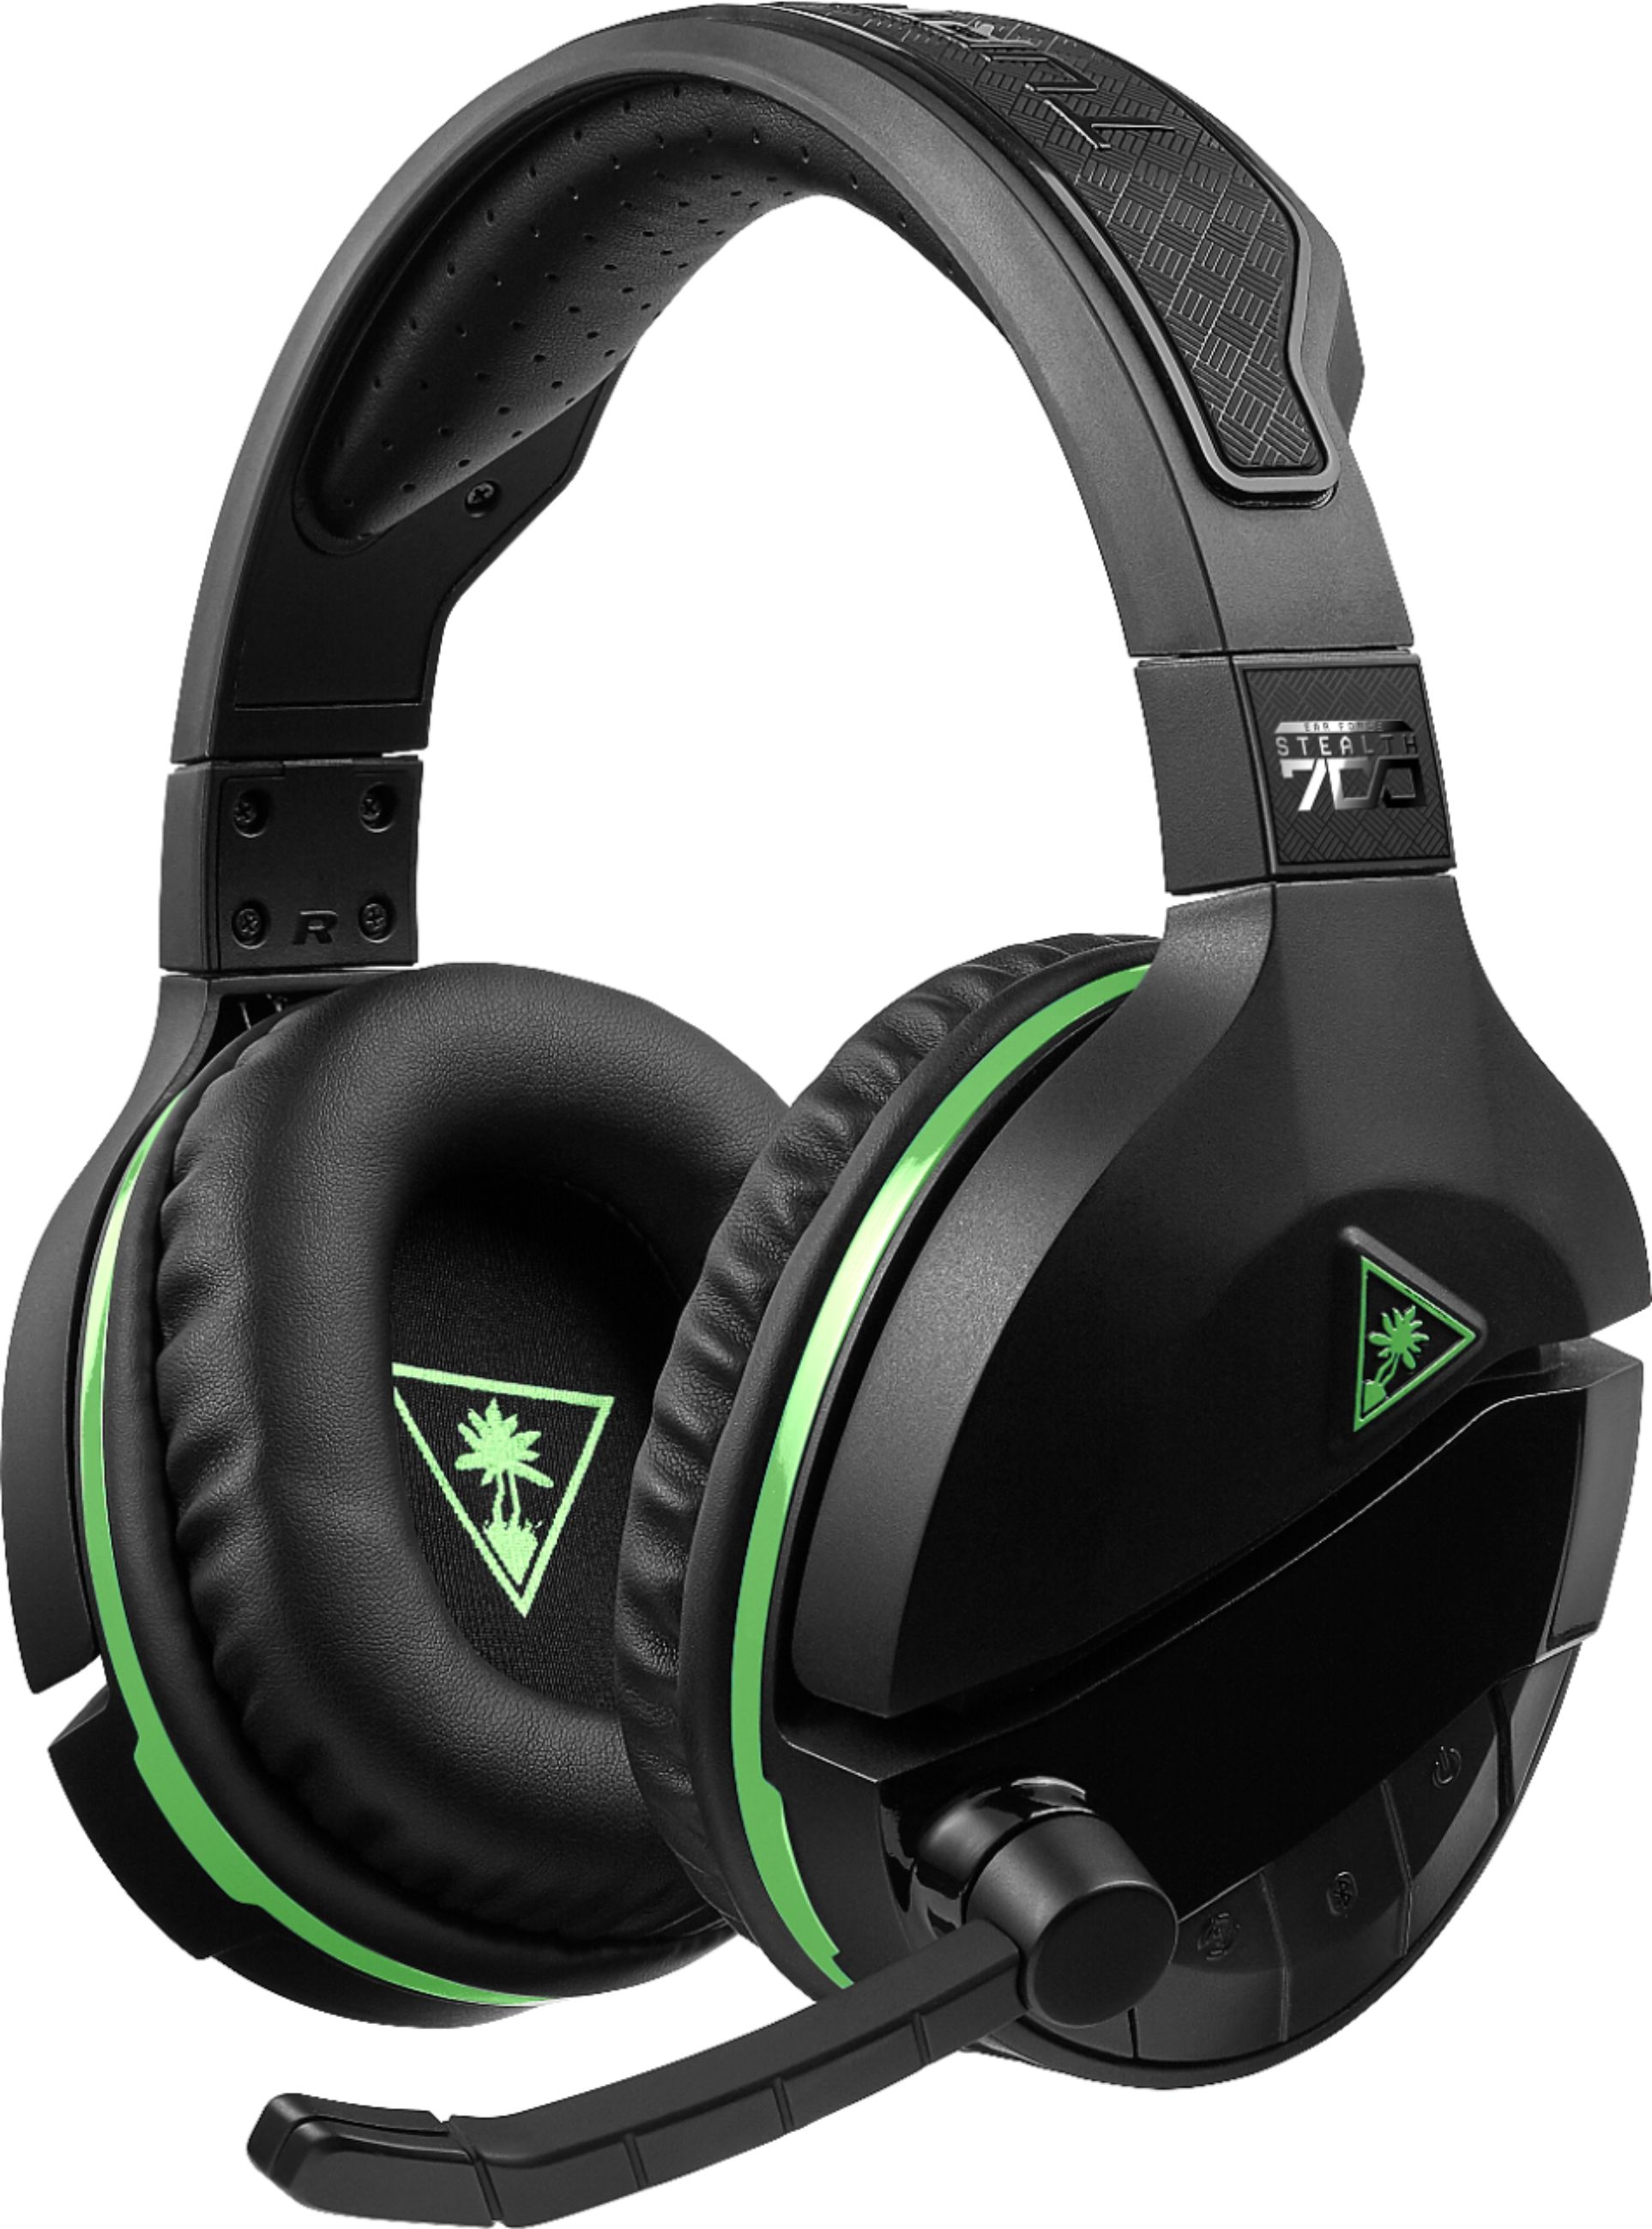 Left View: Turtle Beach Stealth 700 Premium Wireless Gaming Headset for Xbox One and Xbox Series X (Black)